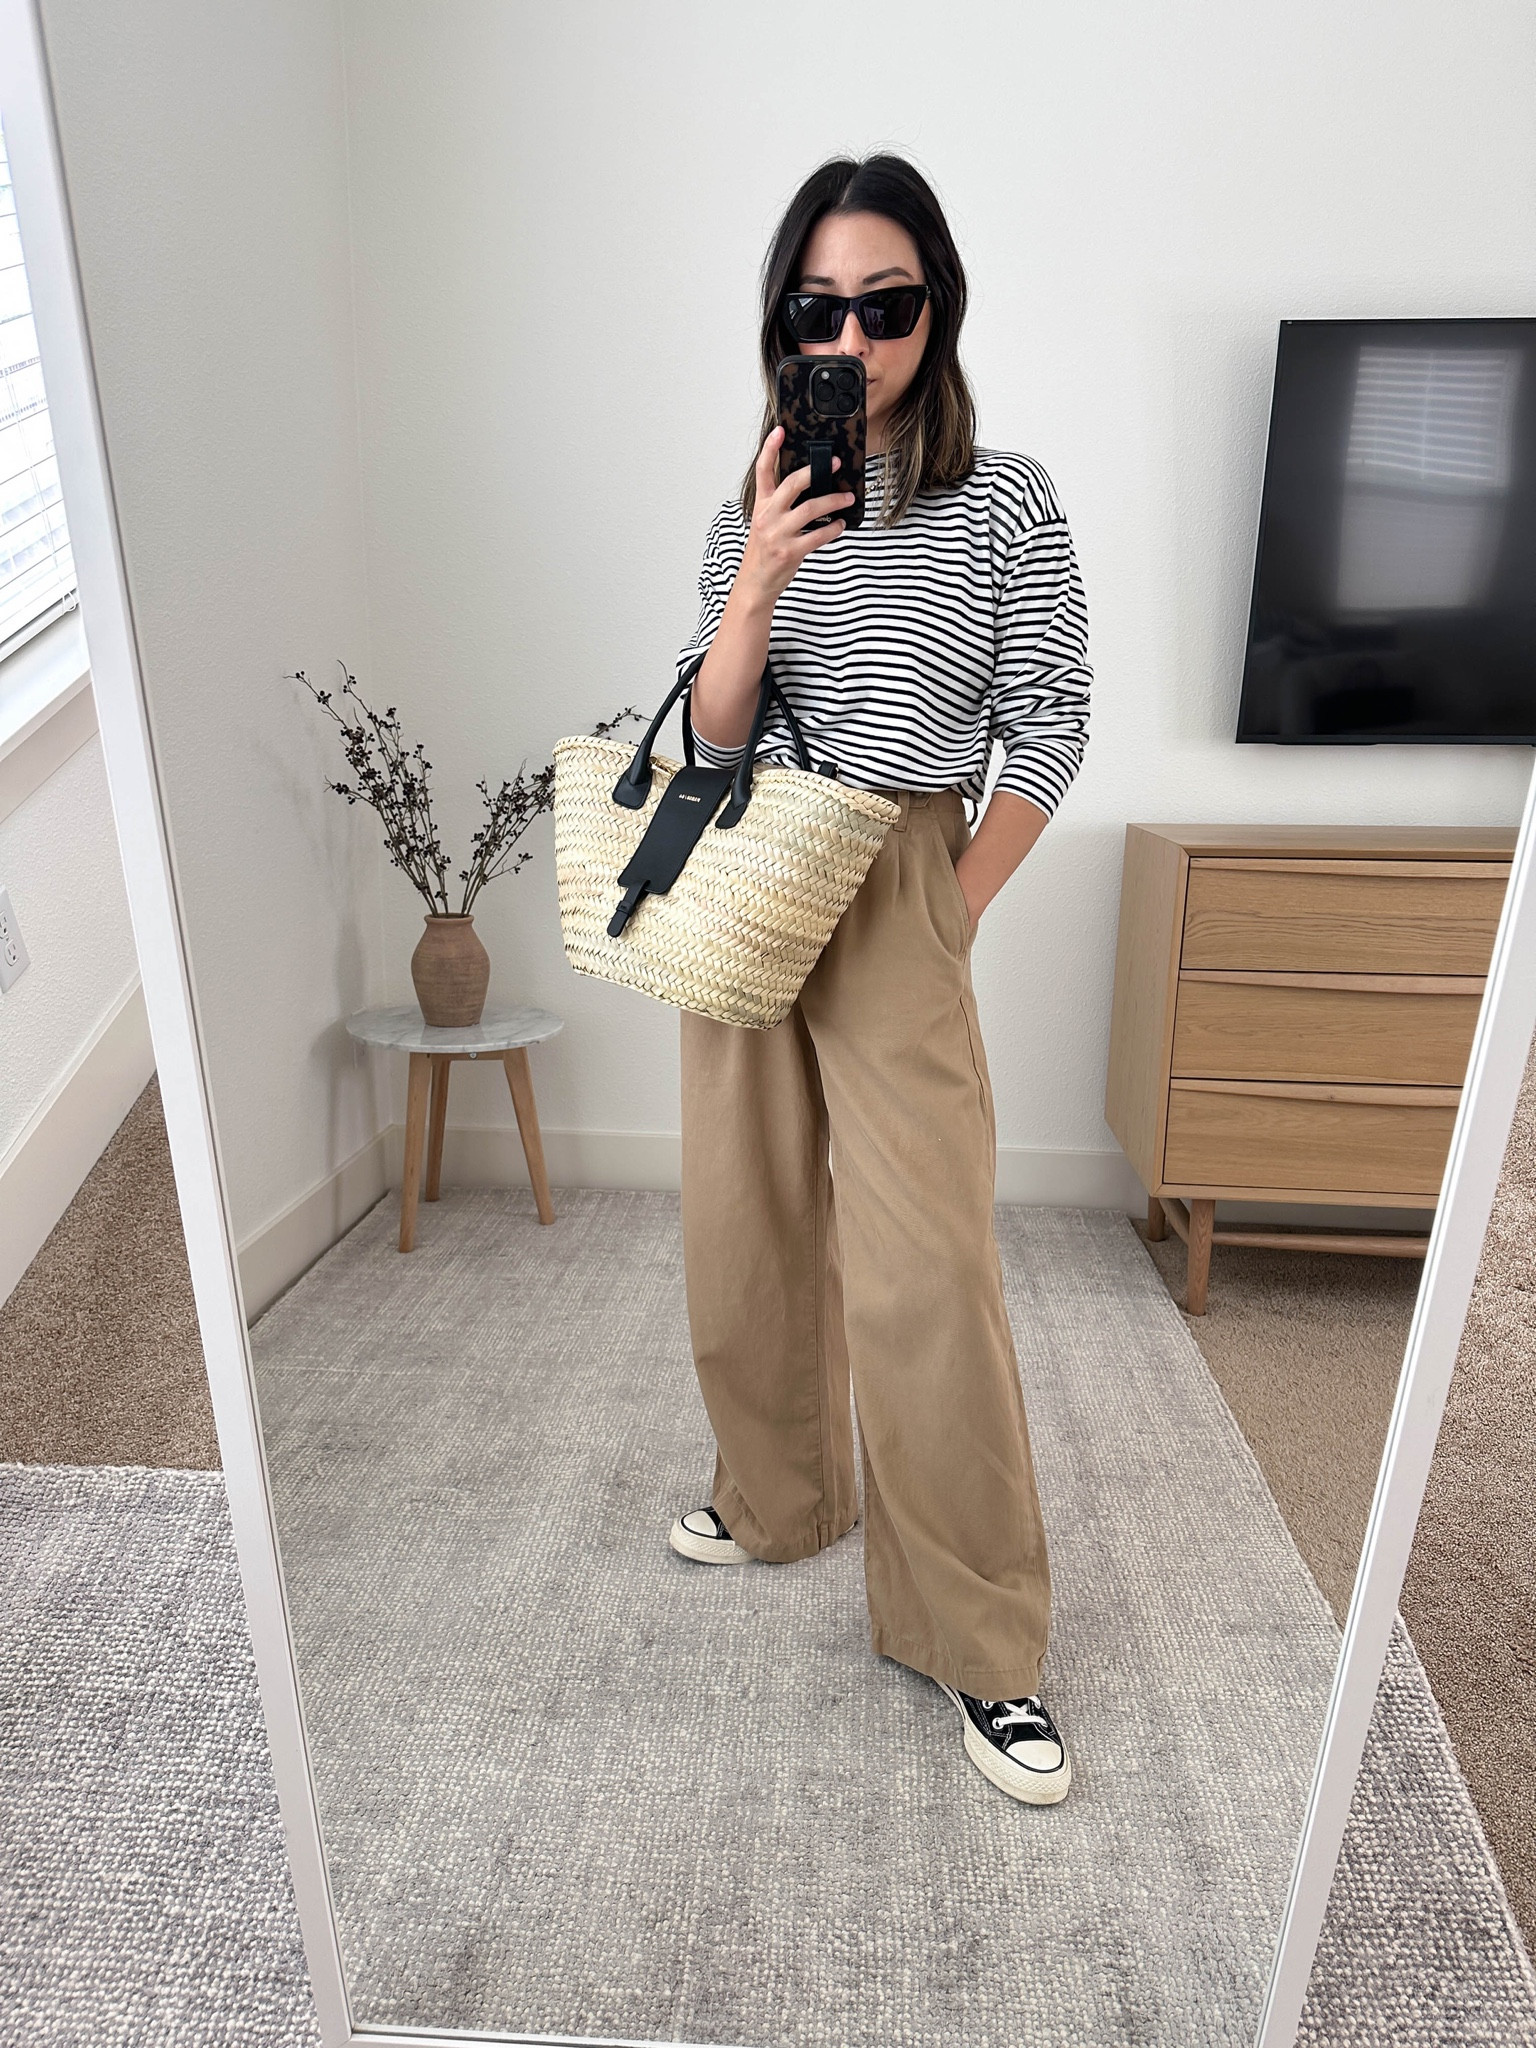 The Petite Harlow Wide-Leg Pant in 100% Linen